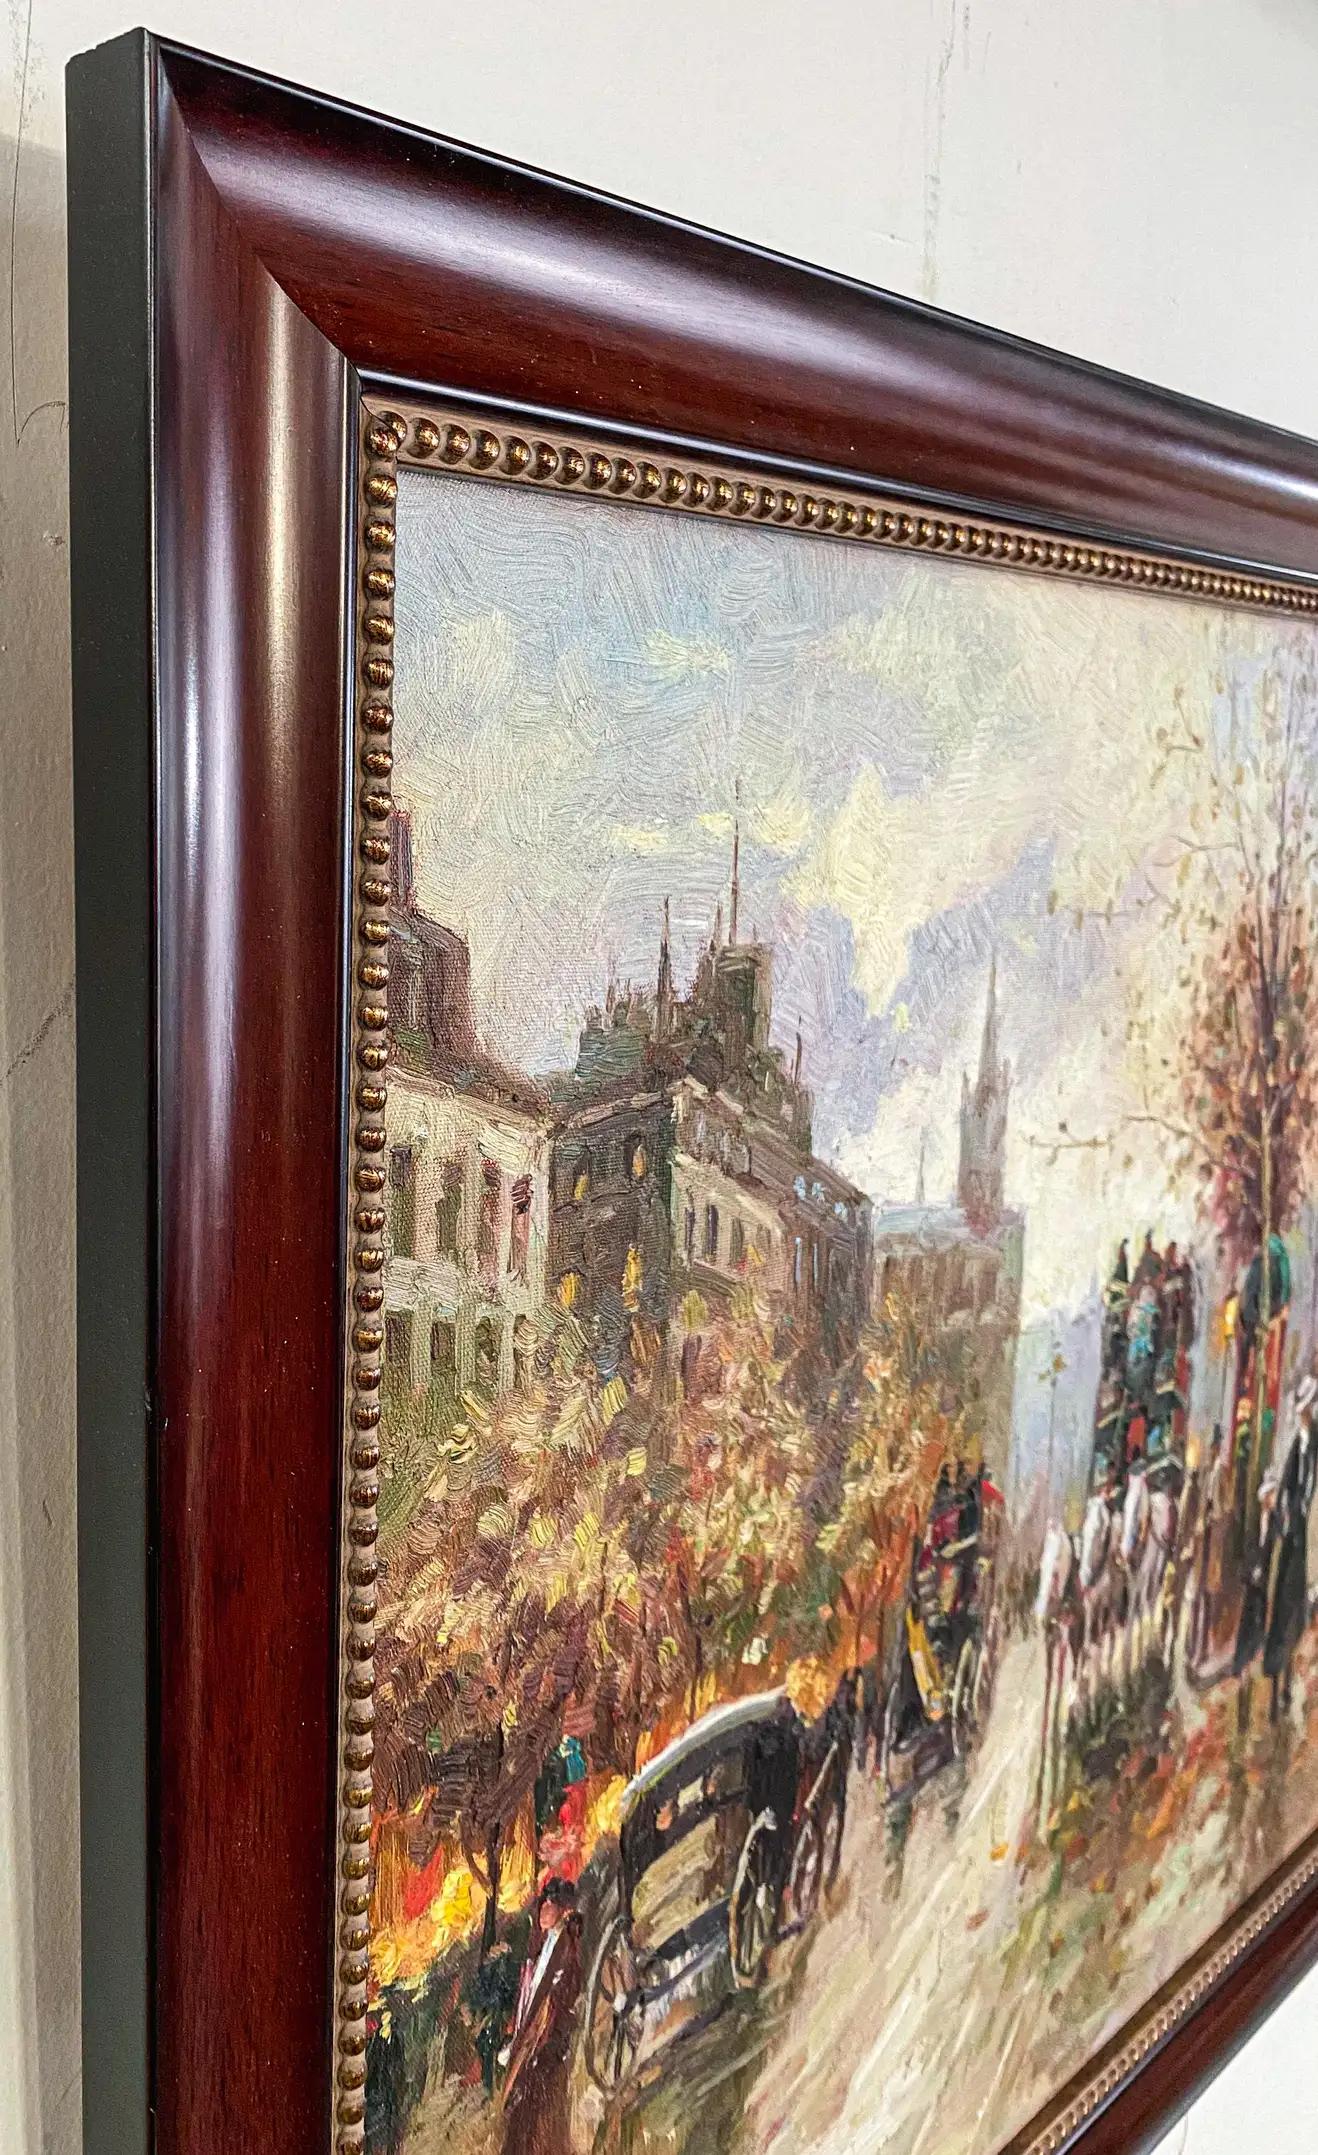 A beautiful Mid-Century cityscape painting signed Leimin in the bottom left. The painting features a scene from the 19th century of large city possibly Paris. The painting is beautifully framed in a custom mahogany frame. 

Dimensions : 28